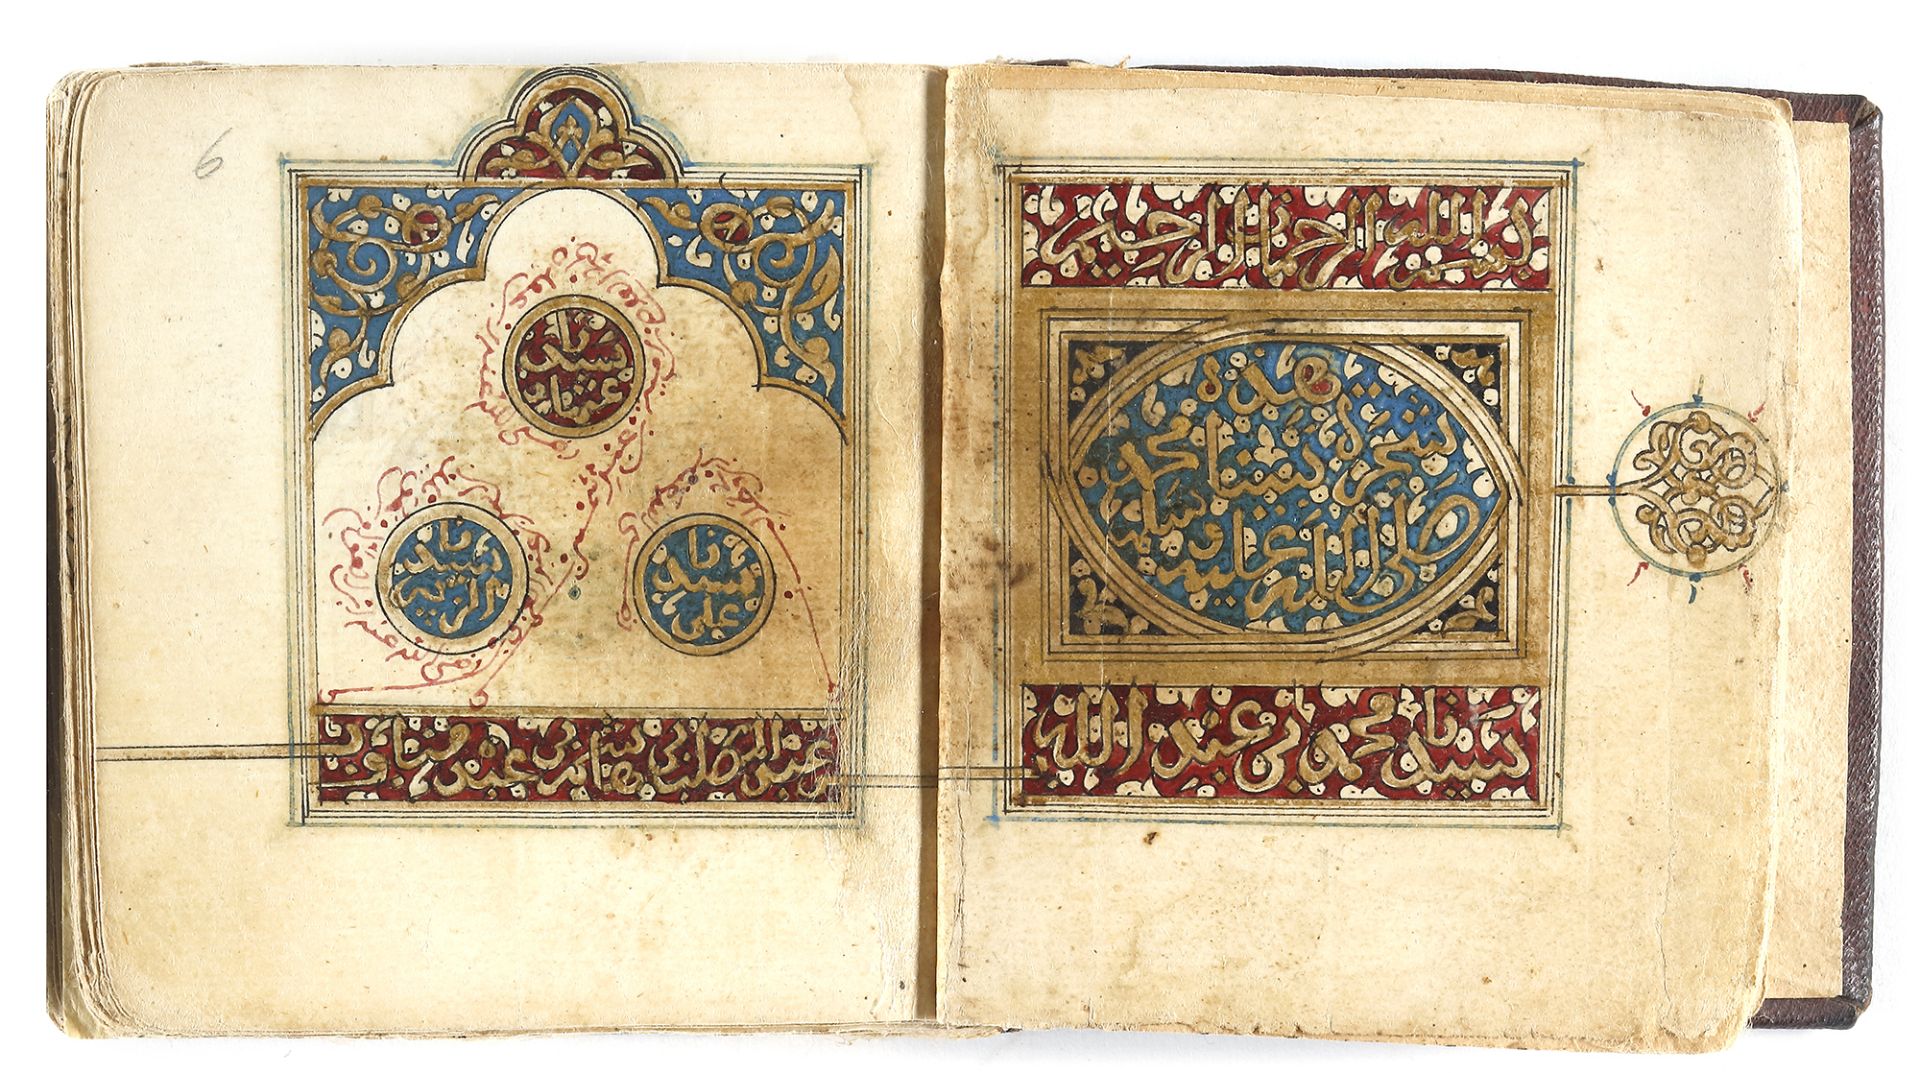 AN ILLUMINATED COLLECTION OF PRAYERS, INCLUDING DALA’IL AL-KHAYRAT, MOROCCO, DATED 1196 AH/1685 AD - Image 2 of 8